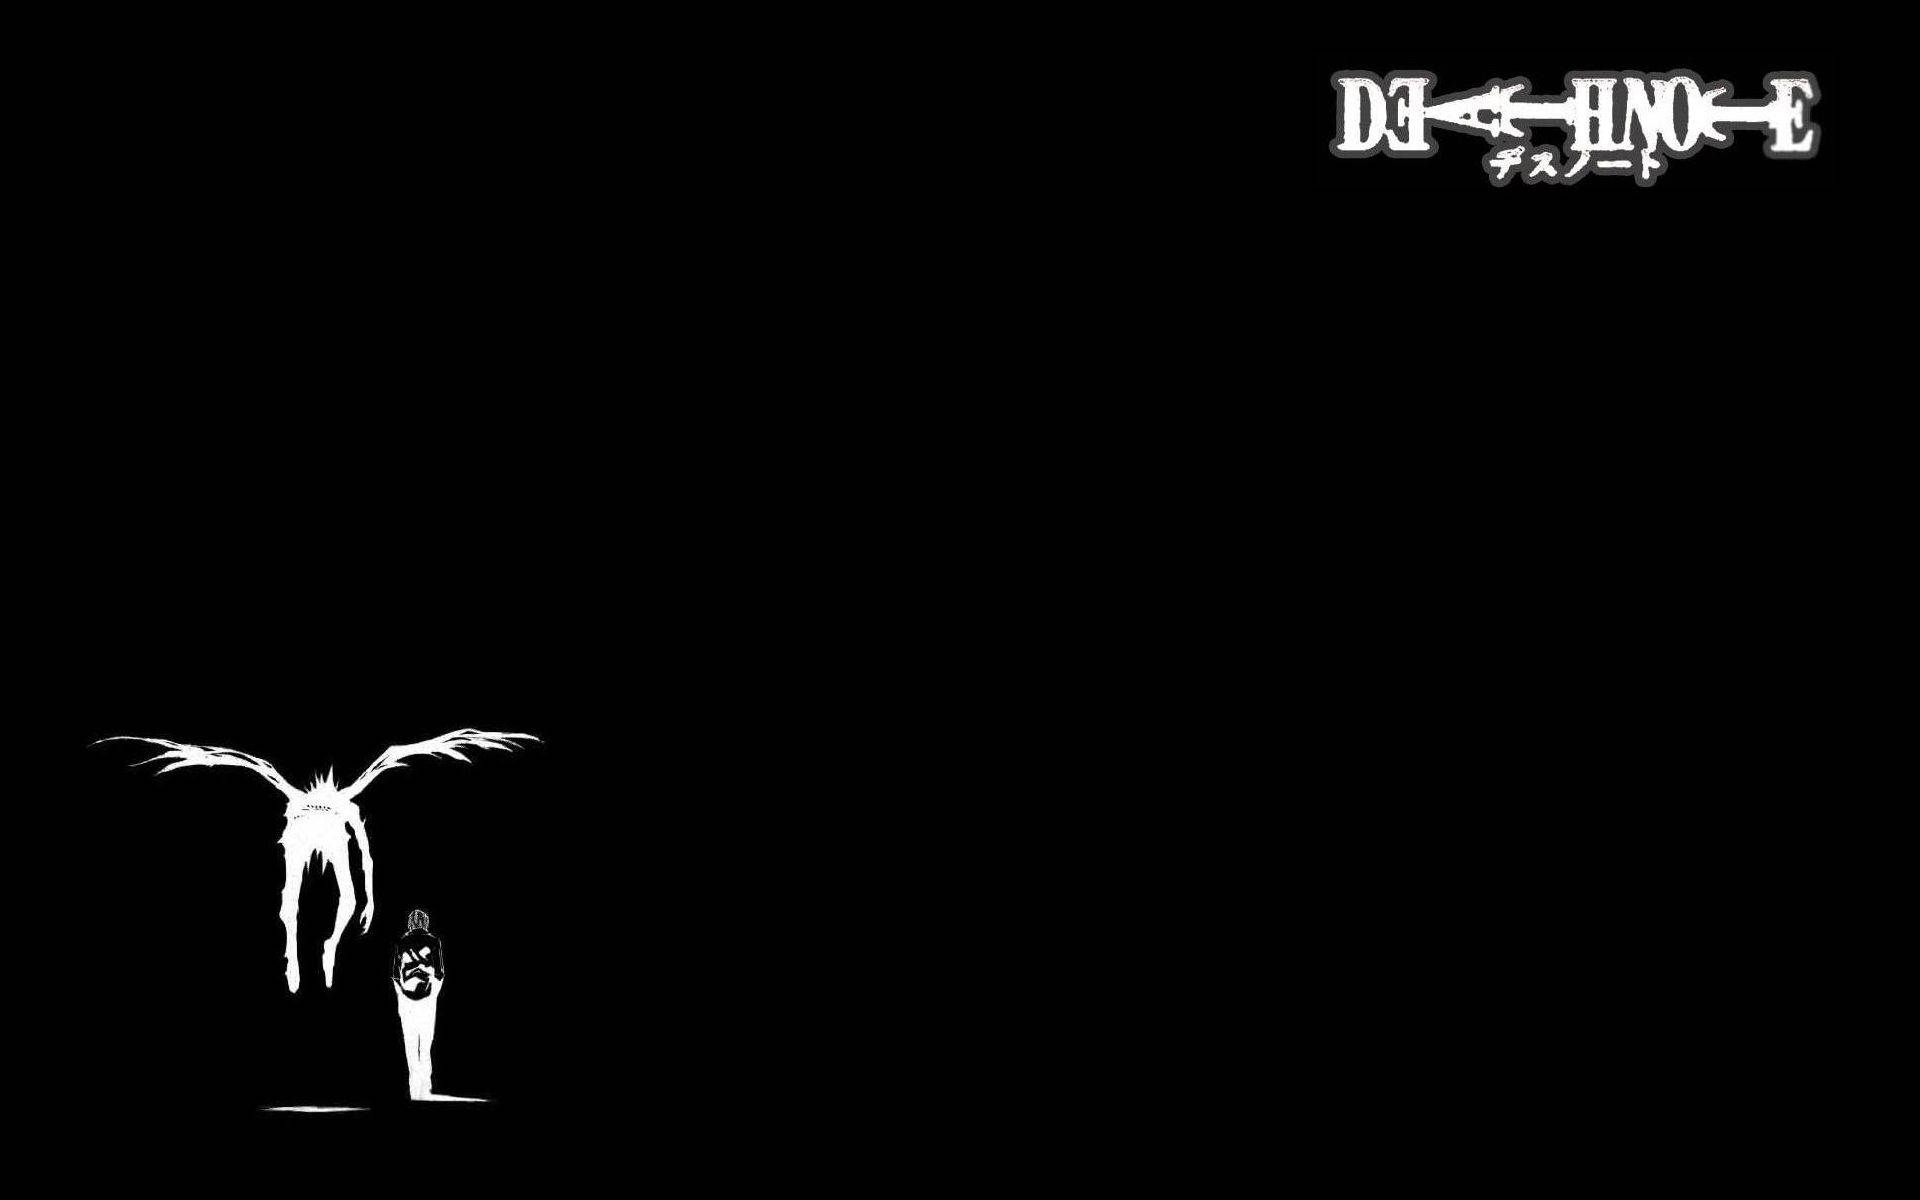 Free Death Note Wallpaper Downloads, [200+] Death Note Wallpapers for FREE  